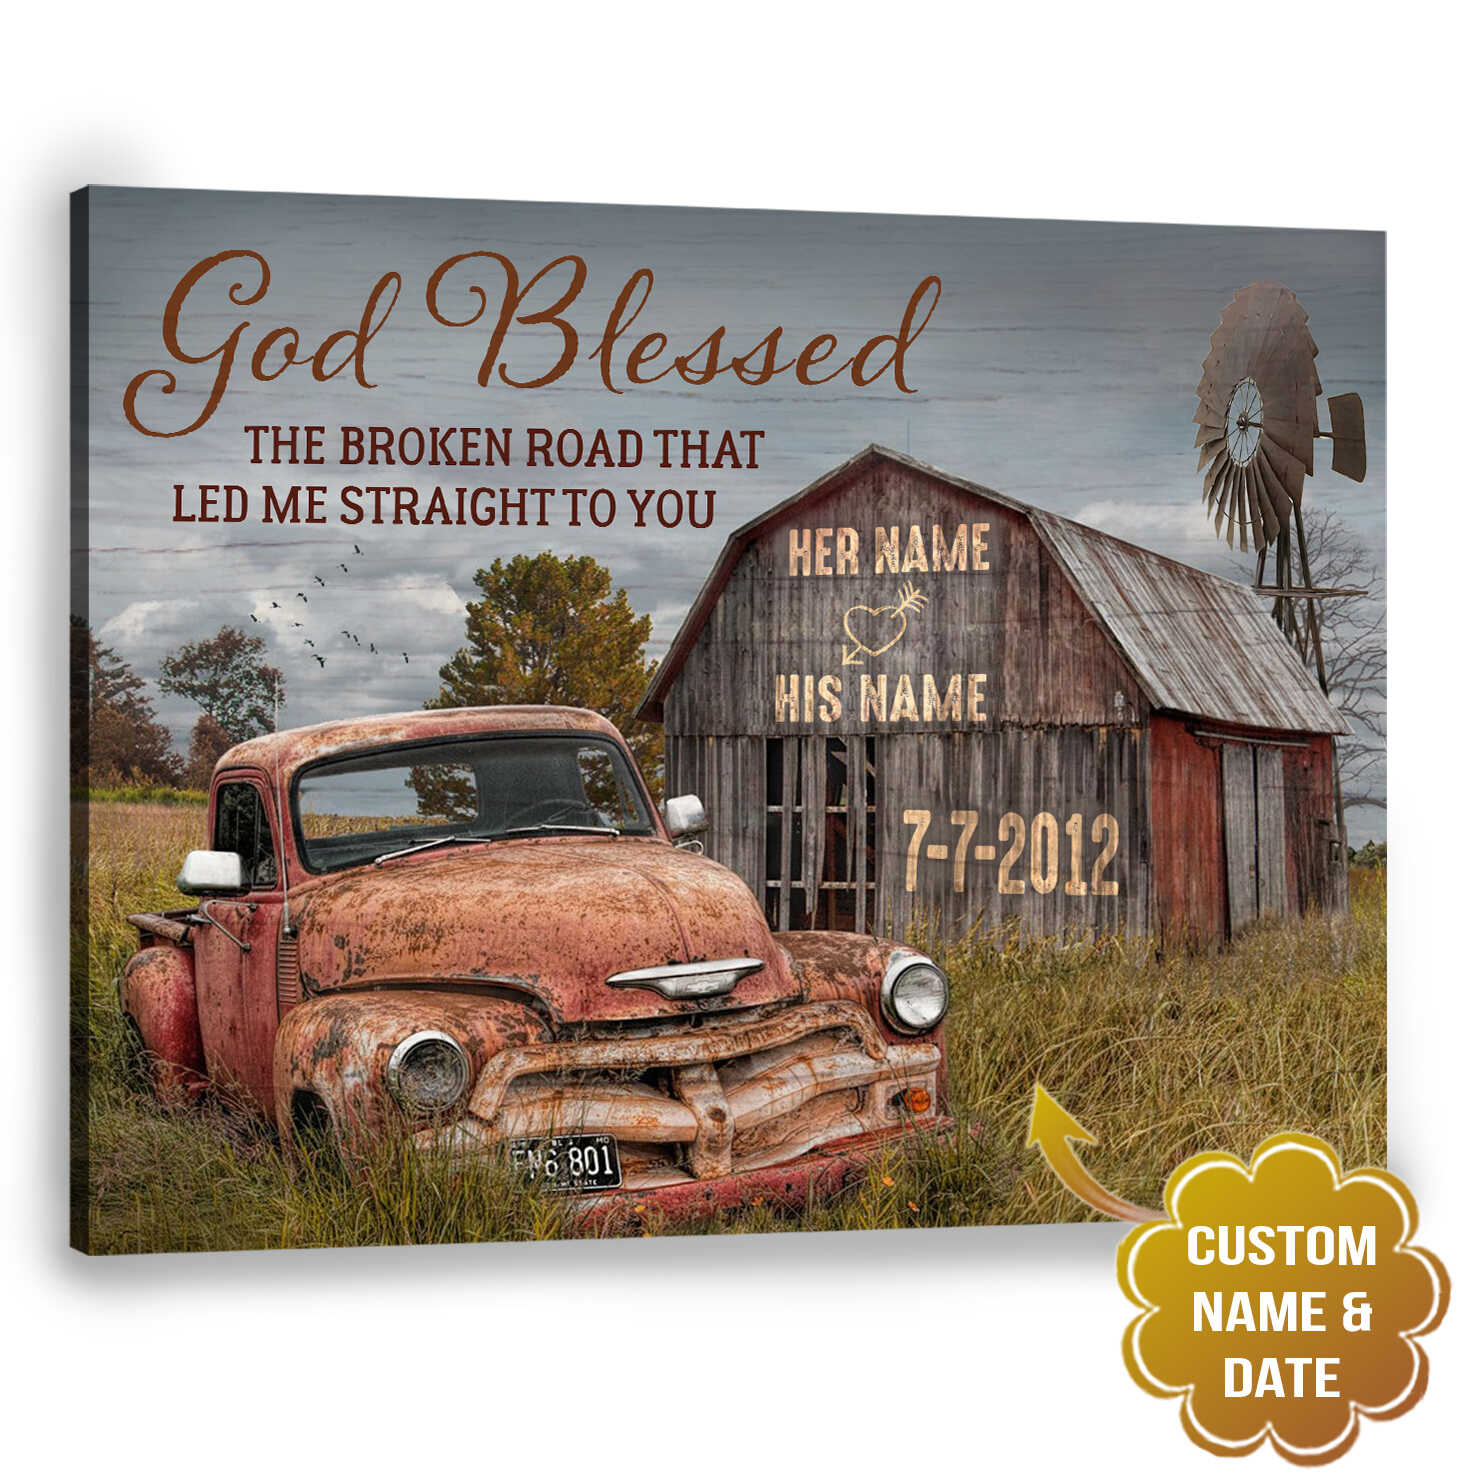 The Broken Road Old Truck and Barn God Blessed custom name canvas